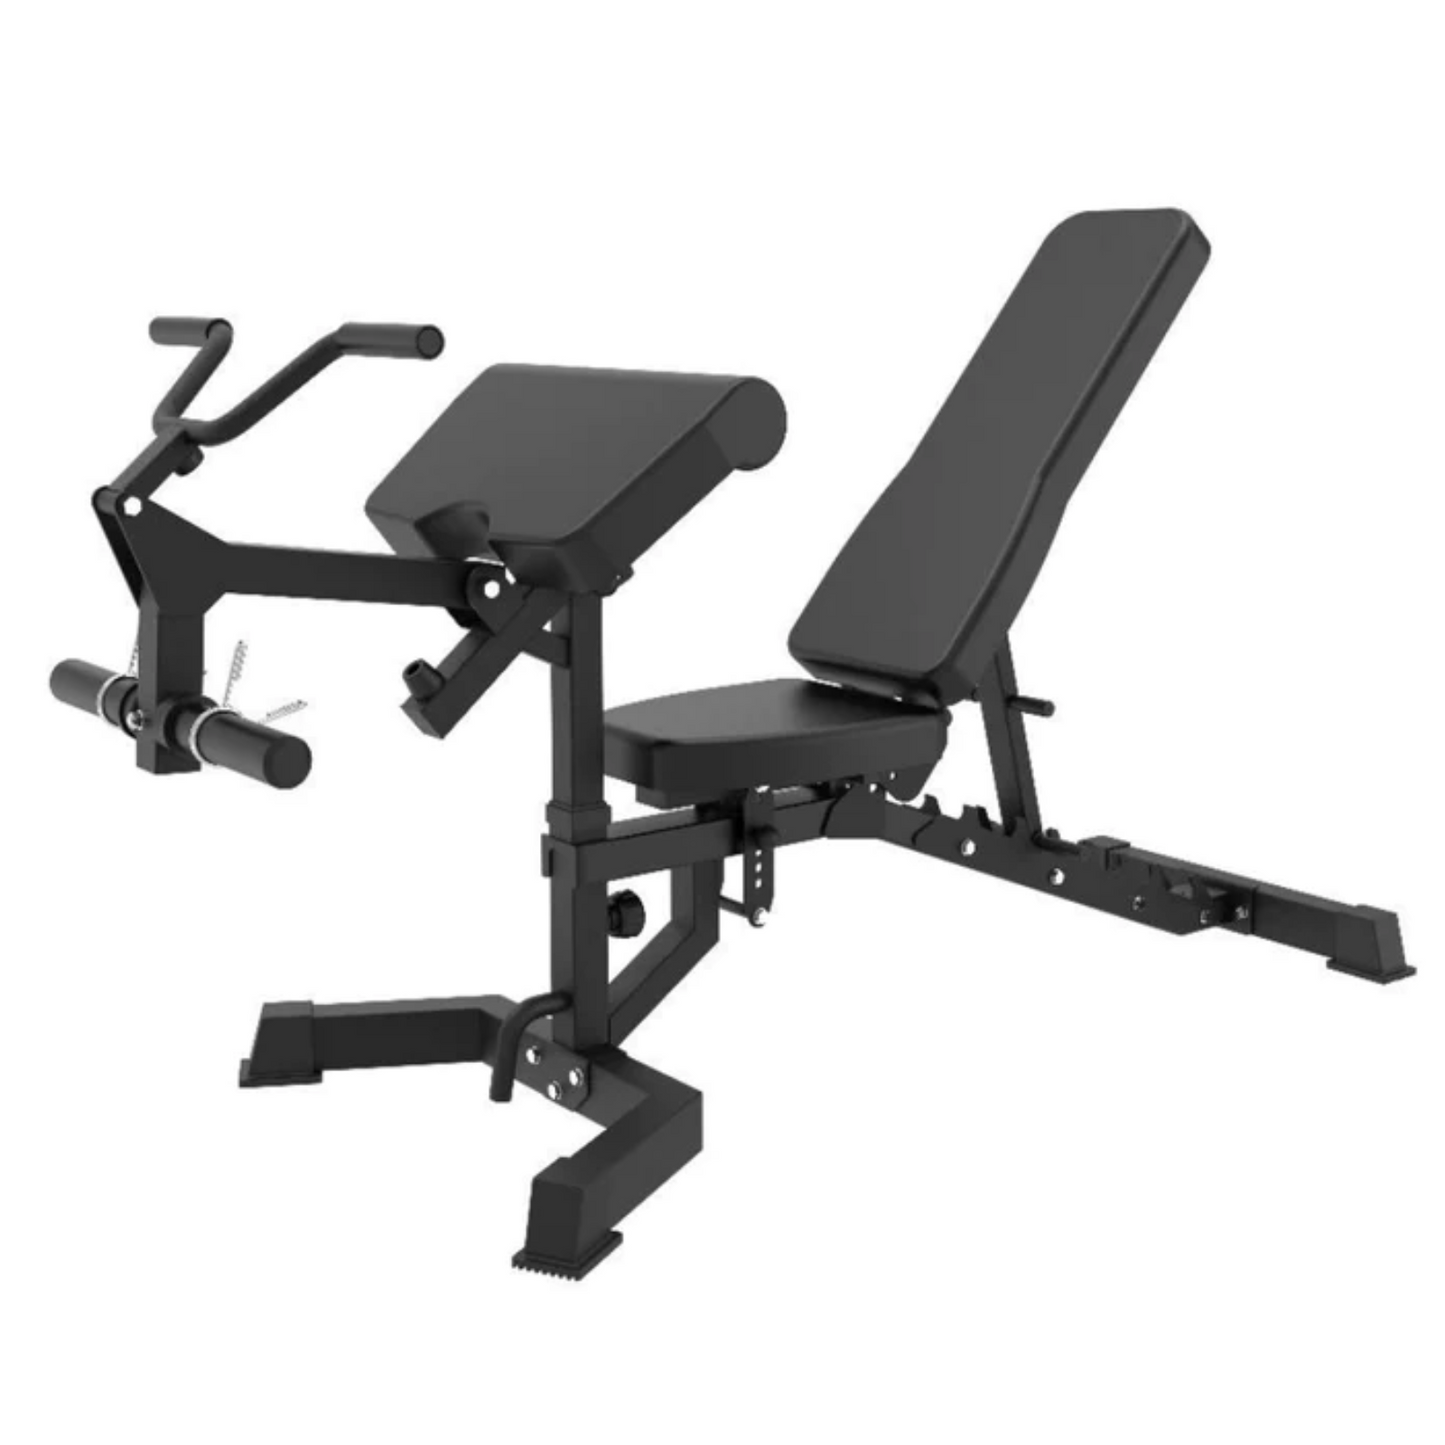 Muscle Motion AB1013 Bench with Preacher Curl Attachment